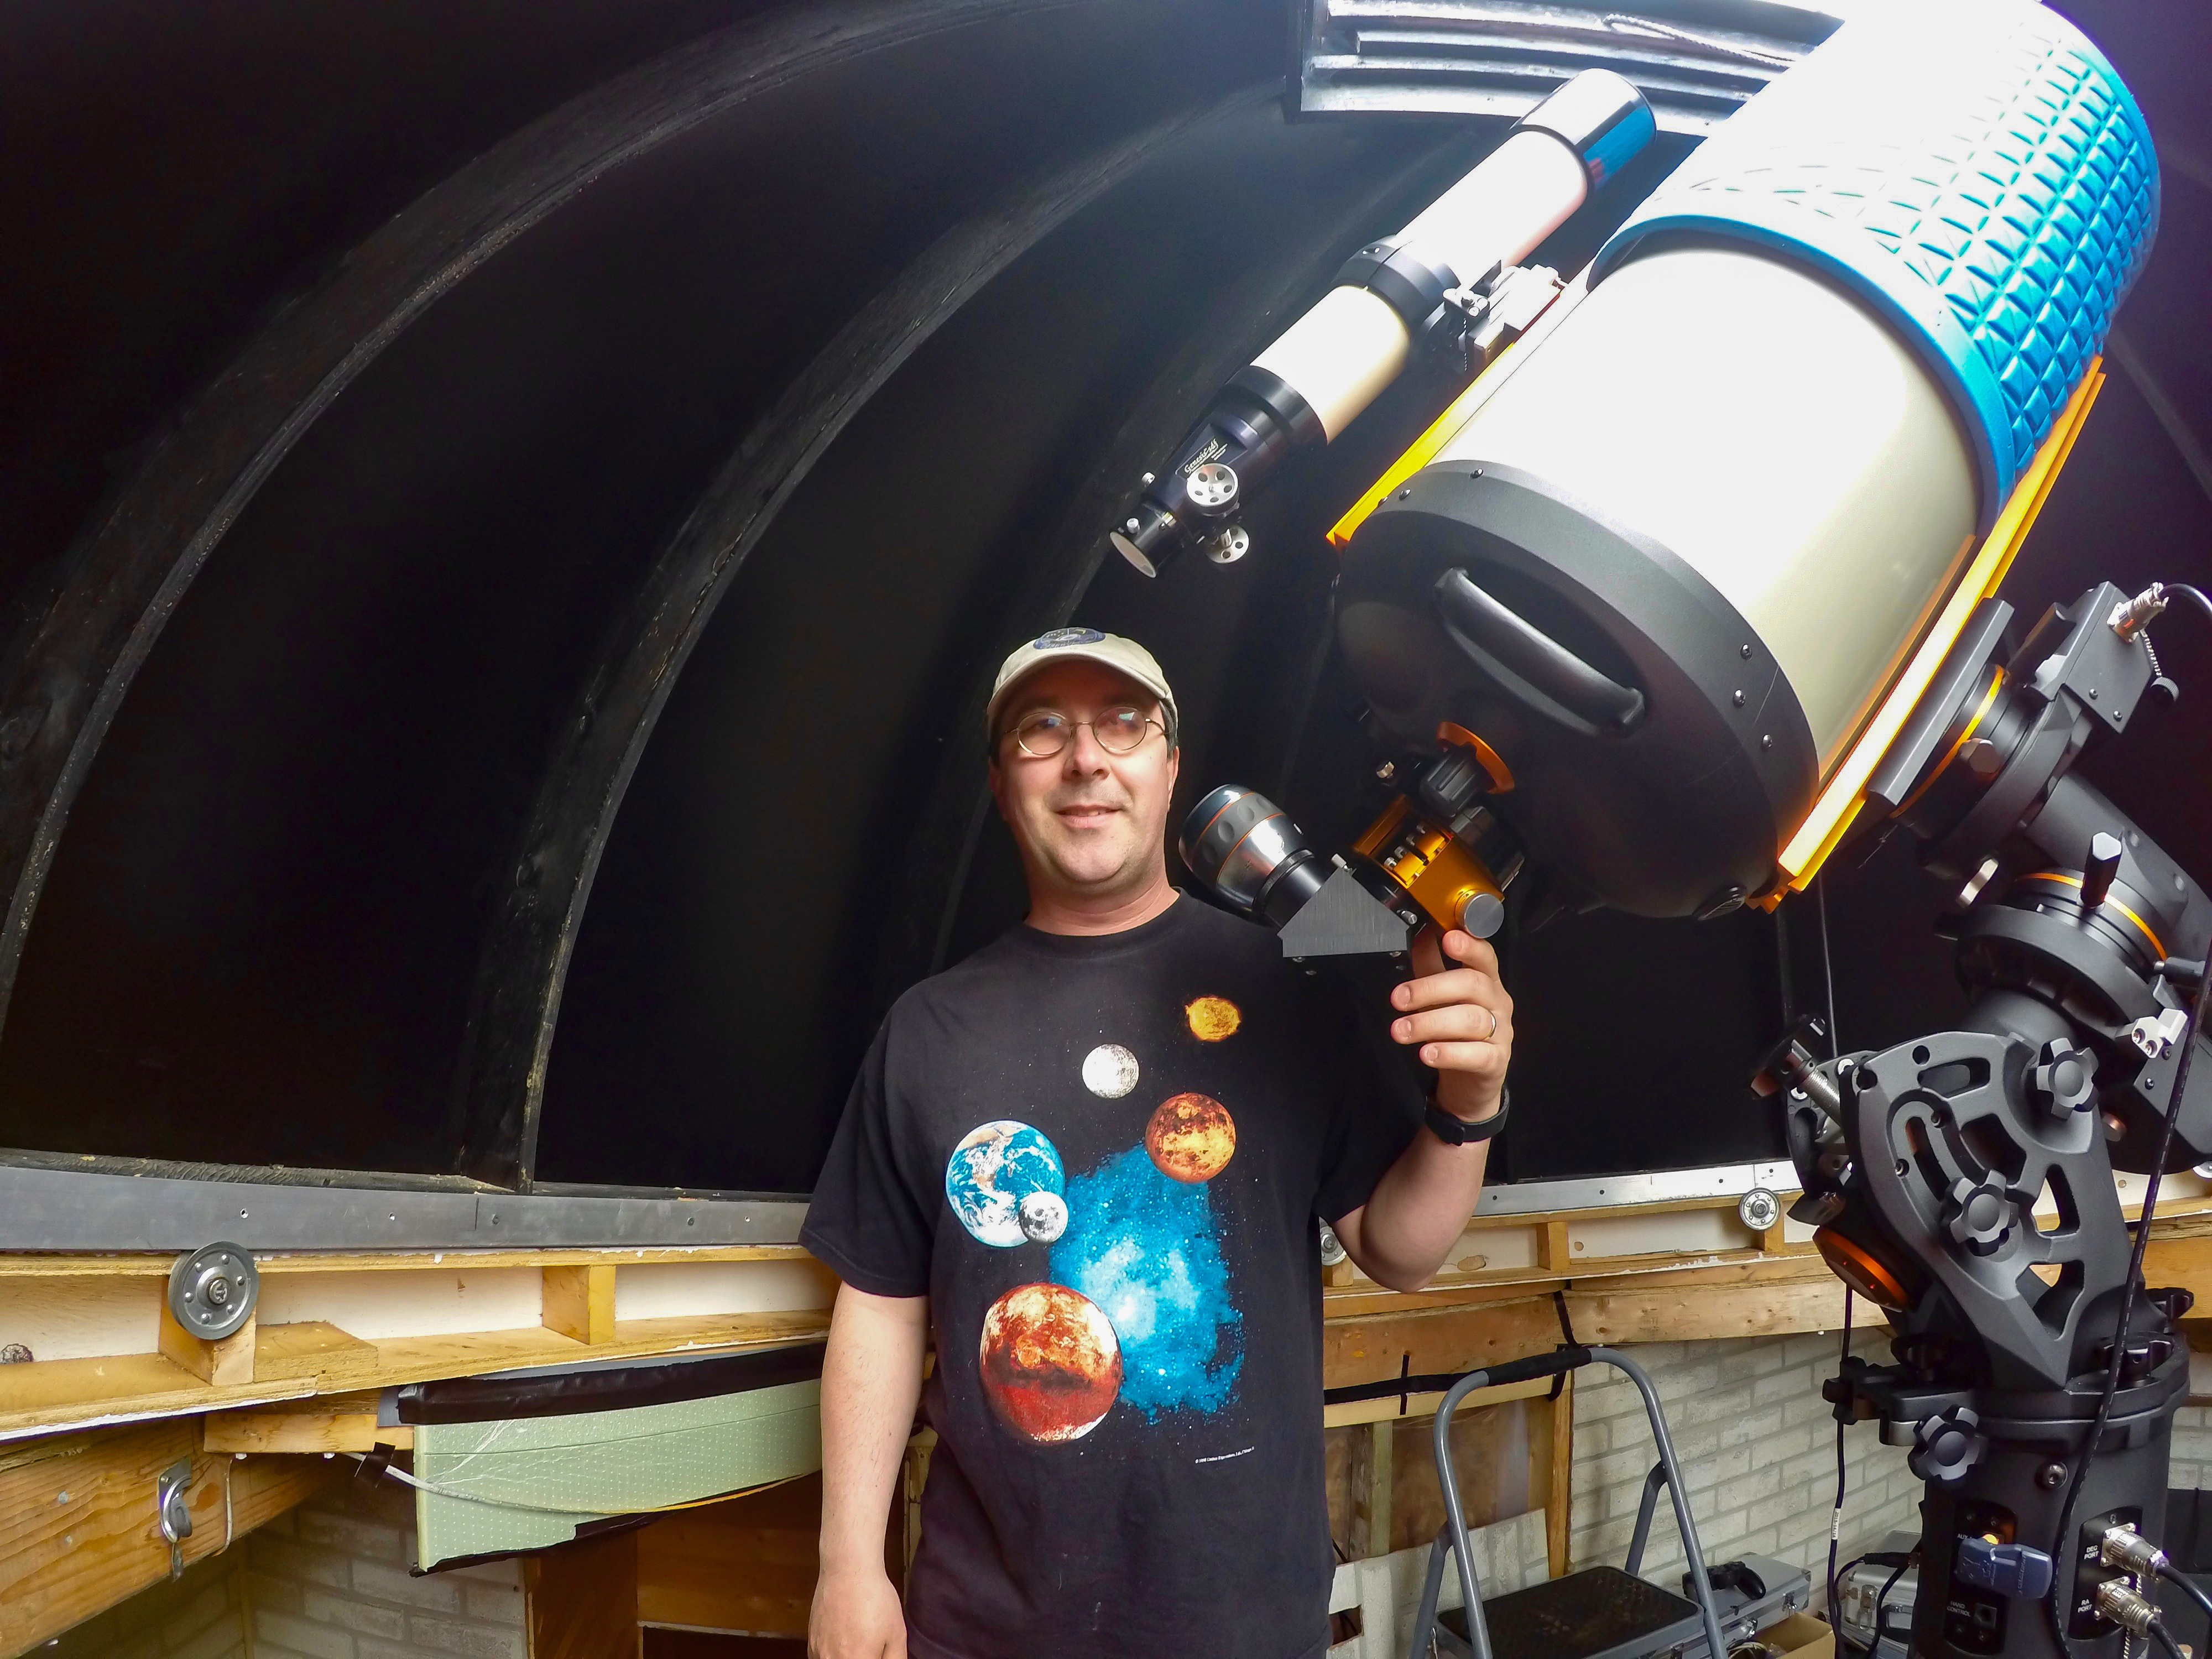 Visually Impaired Amateur Astronomer Helps Everyone See the Cosmos